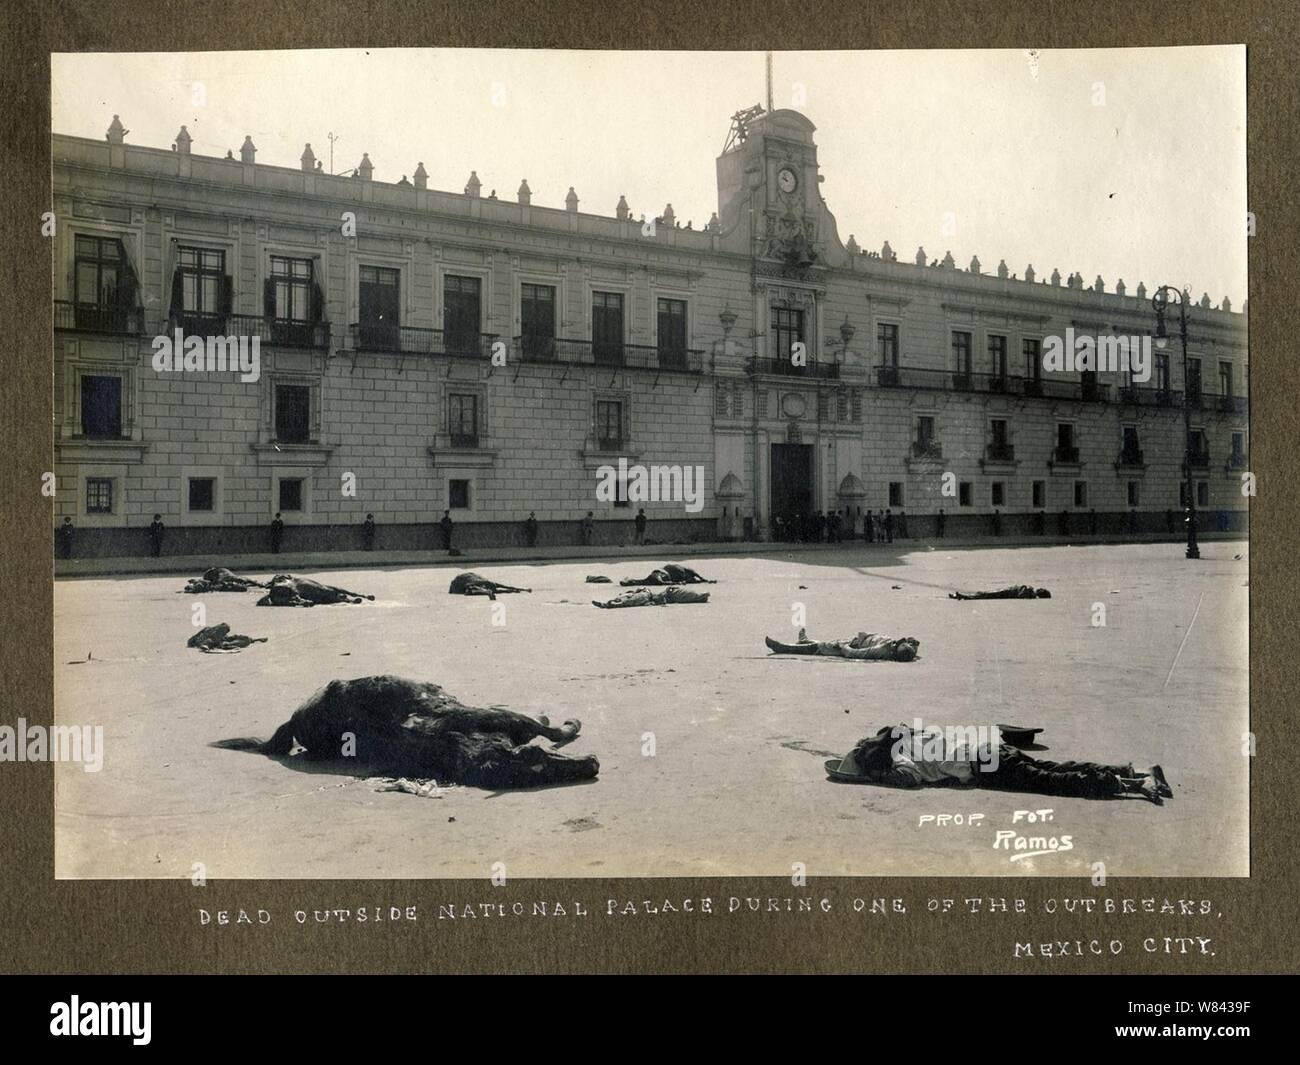 Dead outside National Palace during one of the outbreaks, Mexico City. Stock Photo